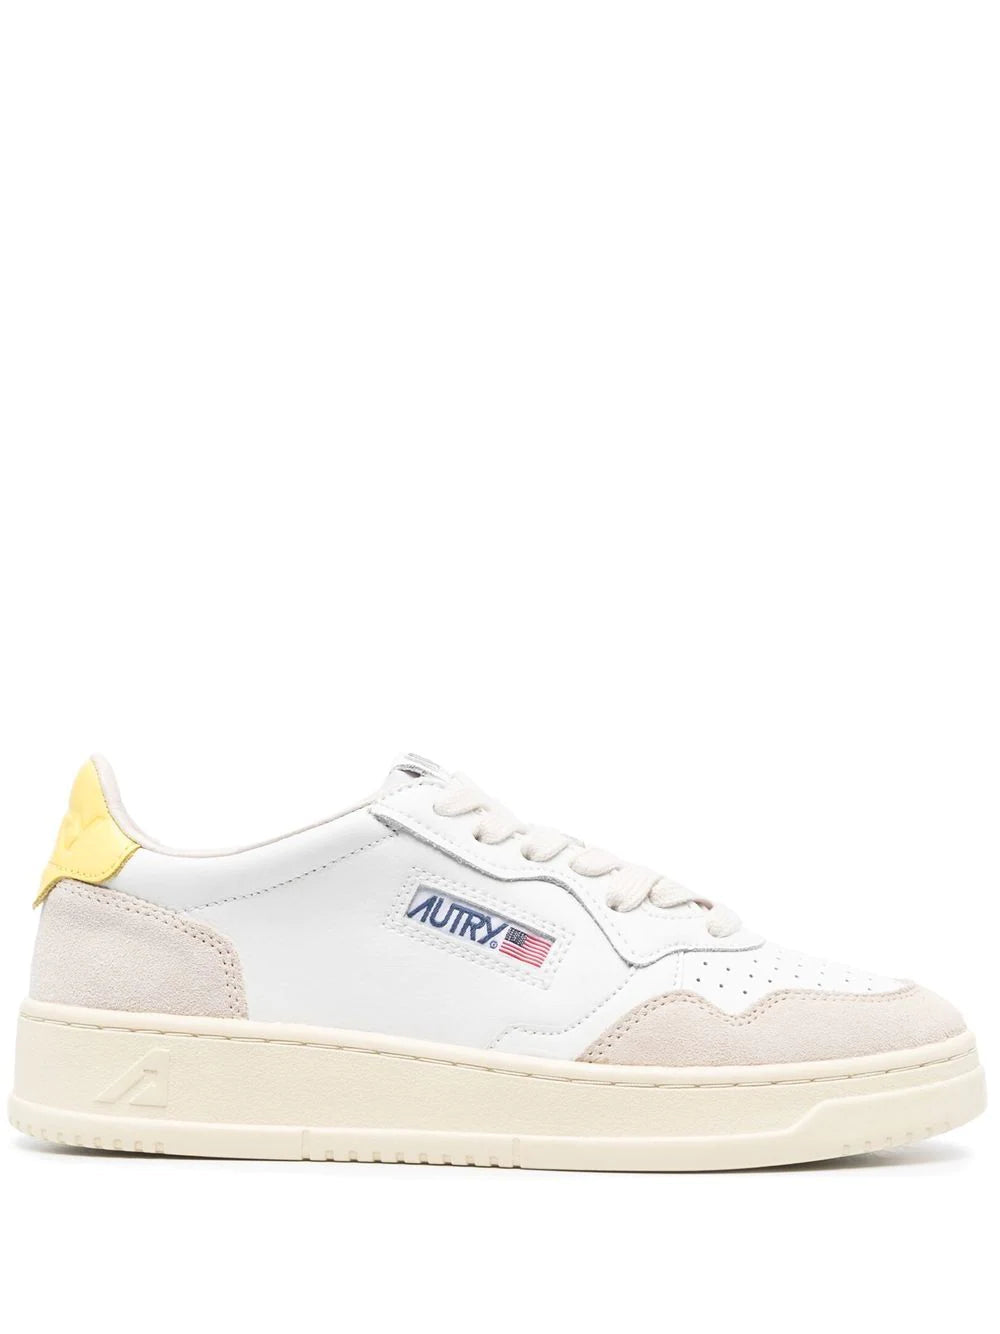 Medalist Low Leather/Suede White & Lemon Grass - AUTRY ACTION TRAINERS